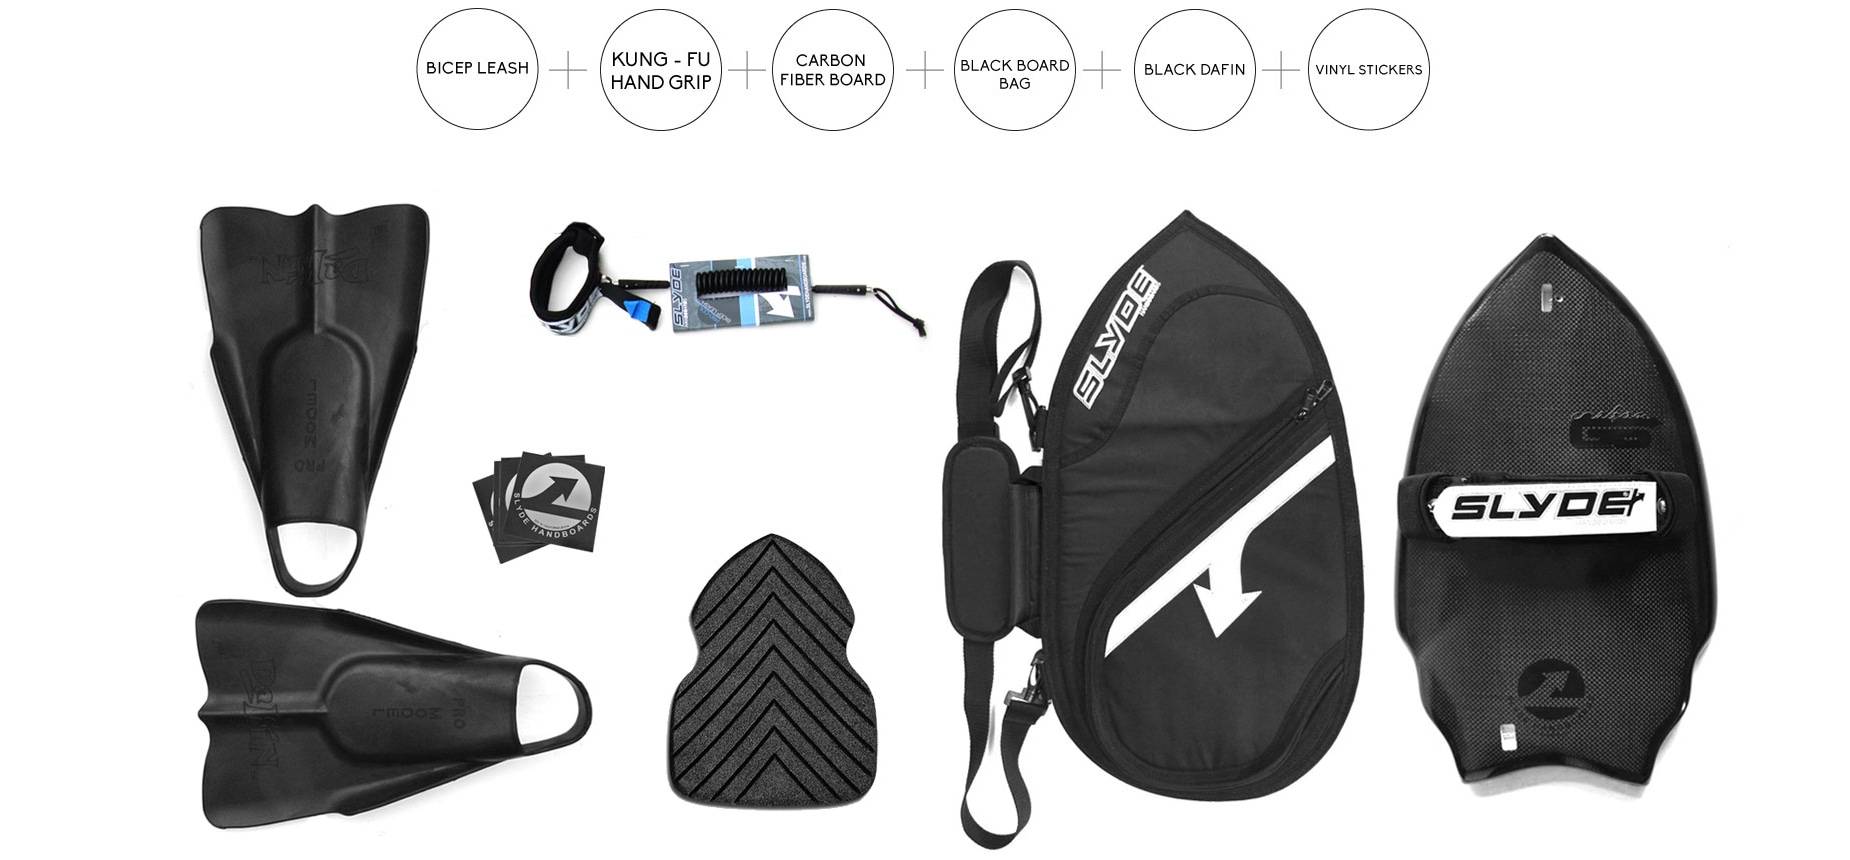 Slyde's giveaway bundle for surfing gear